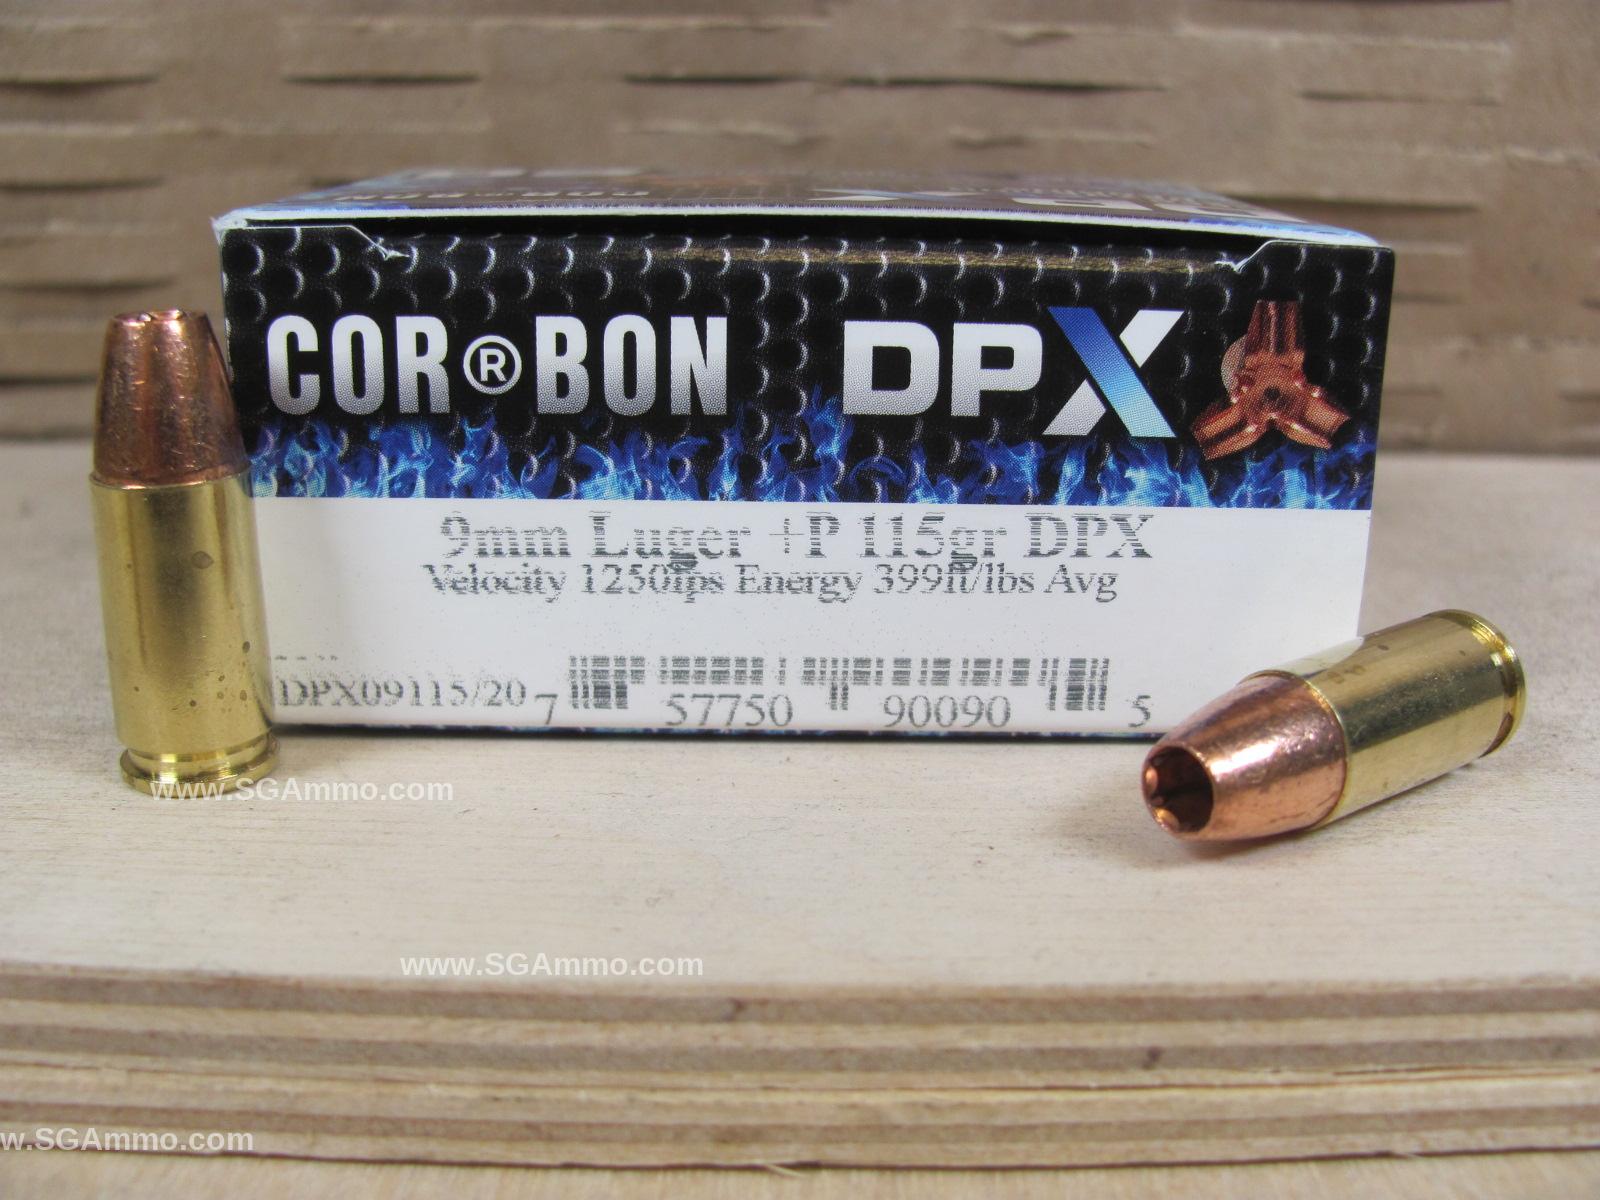 20 Round Box - 9mm Luger +P 115 Grain DPX Hollow Point Corbon Ammo - DPX09115/20